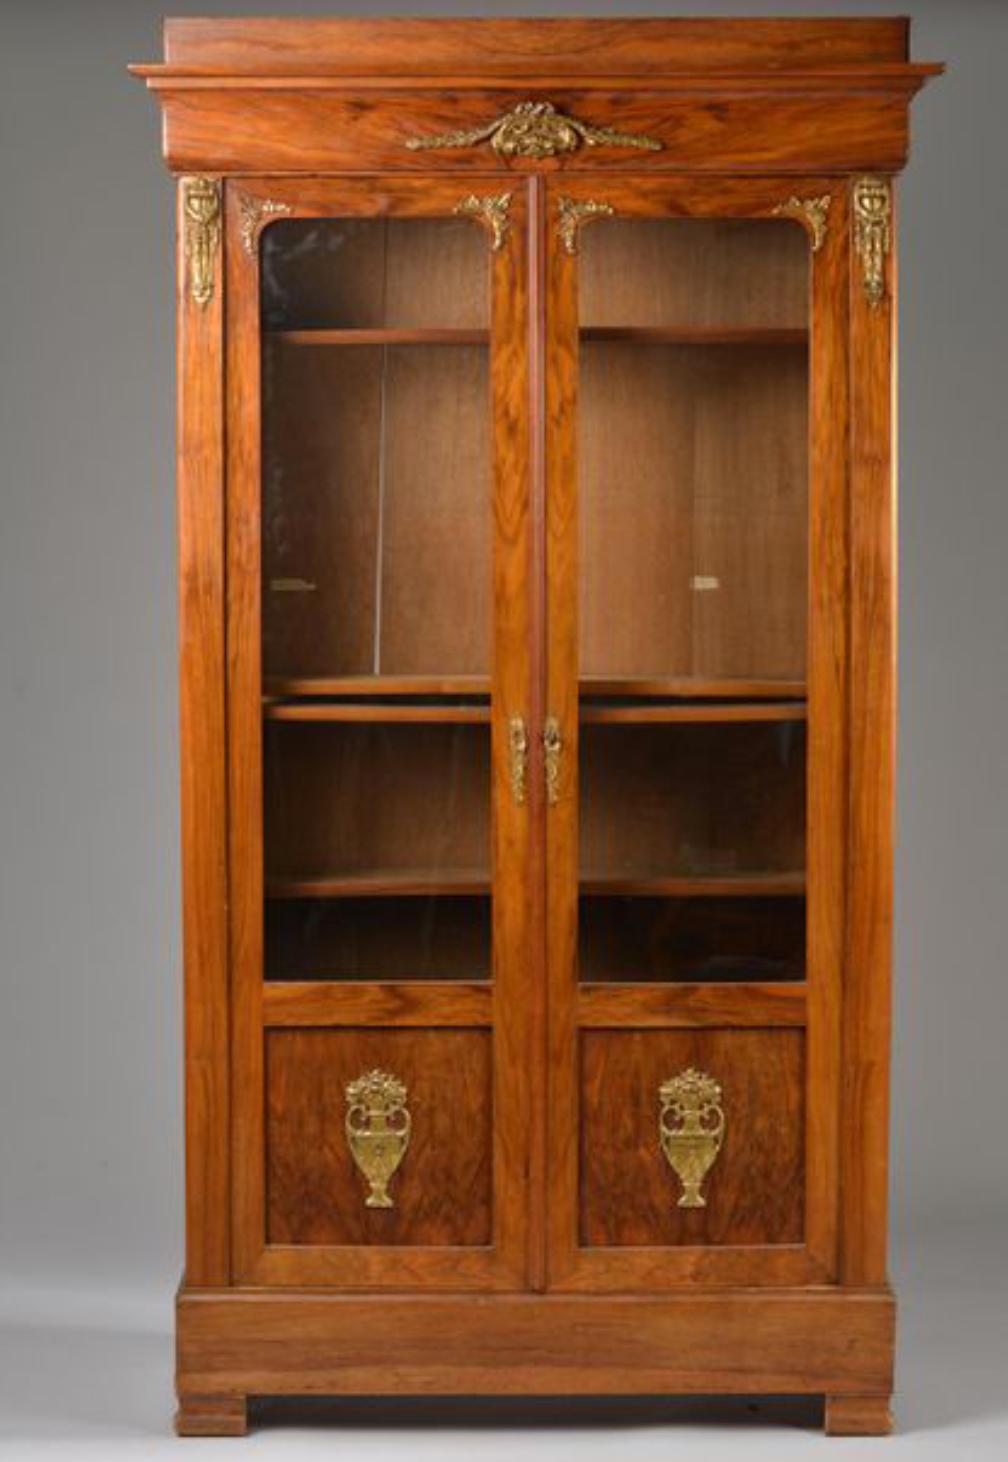 Exquisite French library vitrine in mahogany with two large front doors with original glass and elegant bronze ornamentation. There are five adjustable shelves inside.
Very good condition and optimal size.
France, circa 1860.